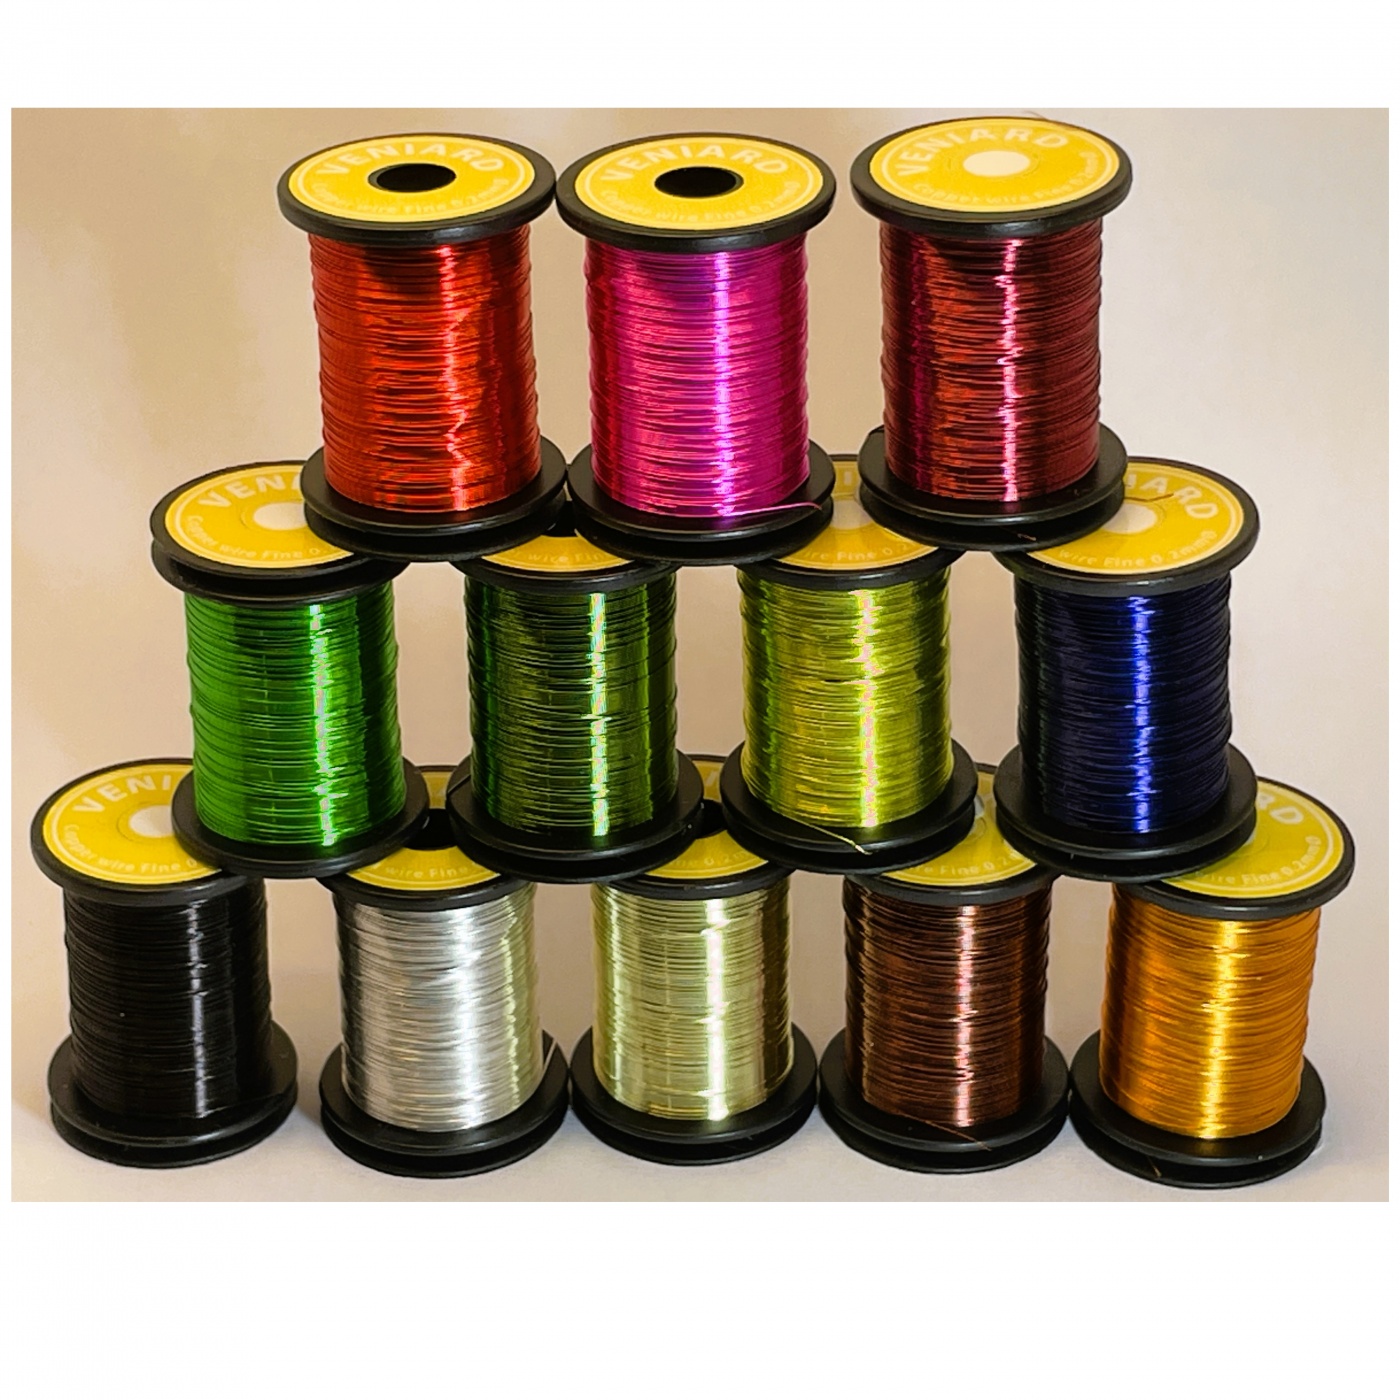 Veniard Coloured Copper Wire Fine 0.2mm Mixed Box Of 12 Fly Tying Materials (Product Length 14.2Yds / 13m 12 Pack)